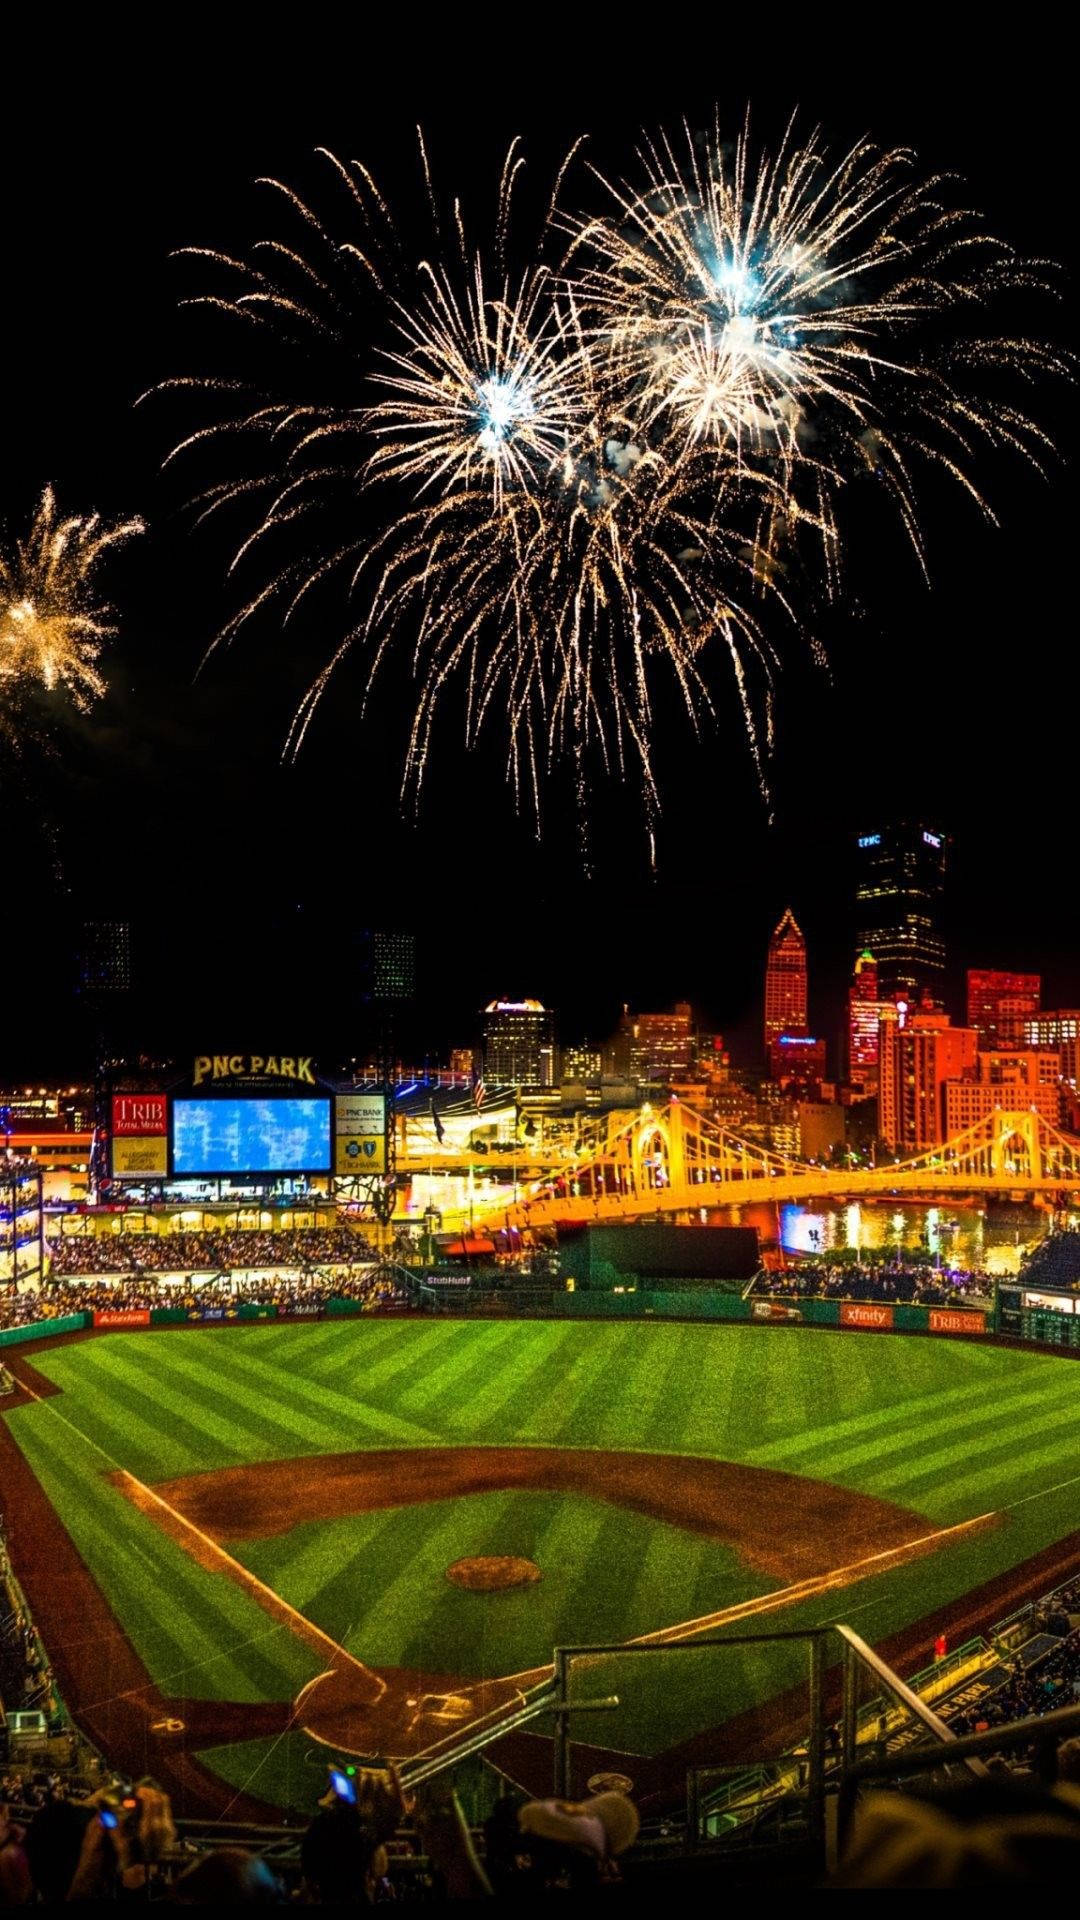 Cool Baseball Arena With Fireworks